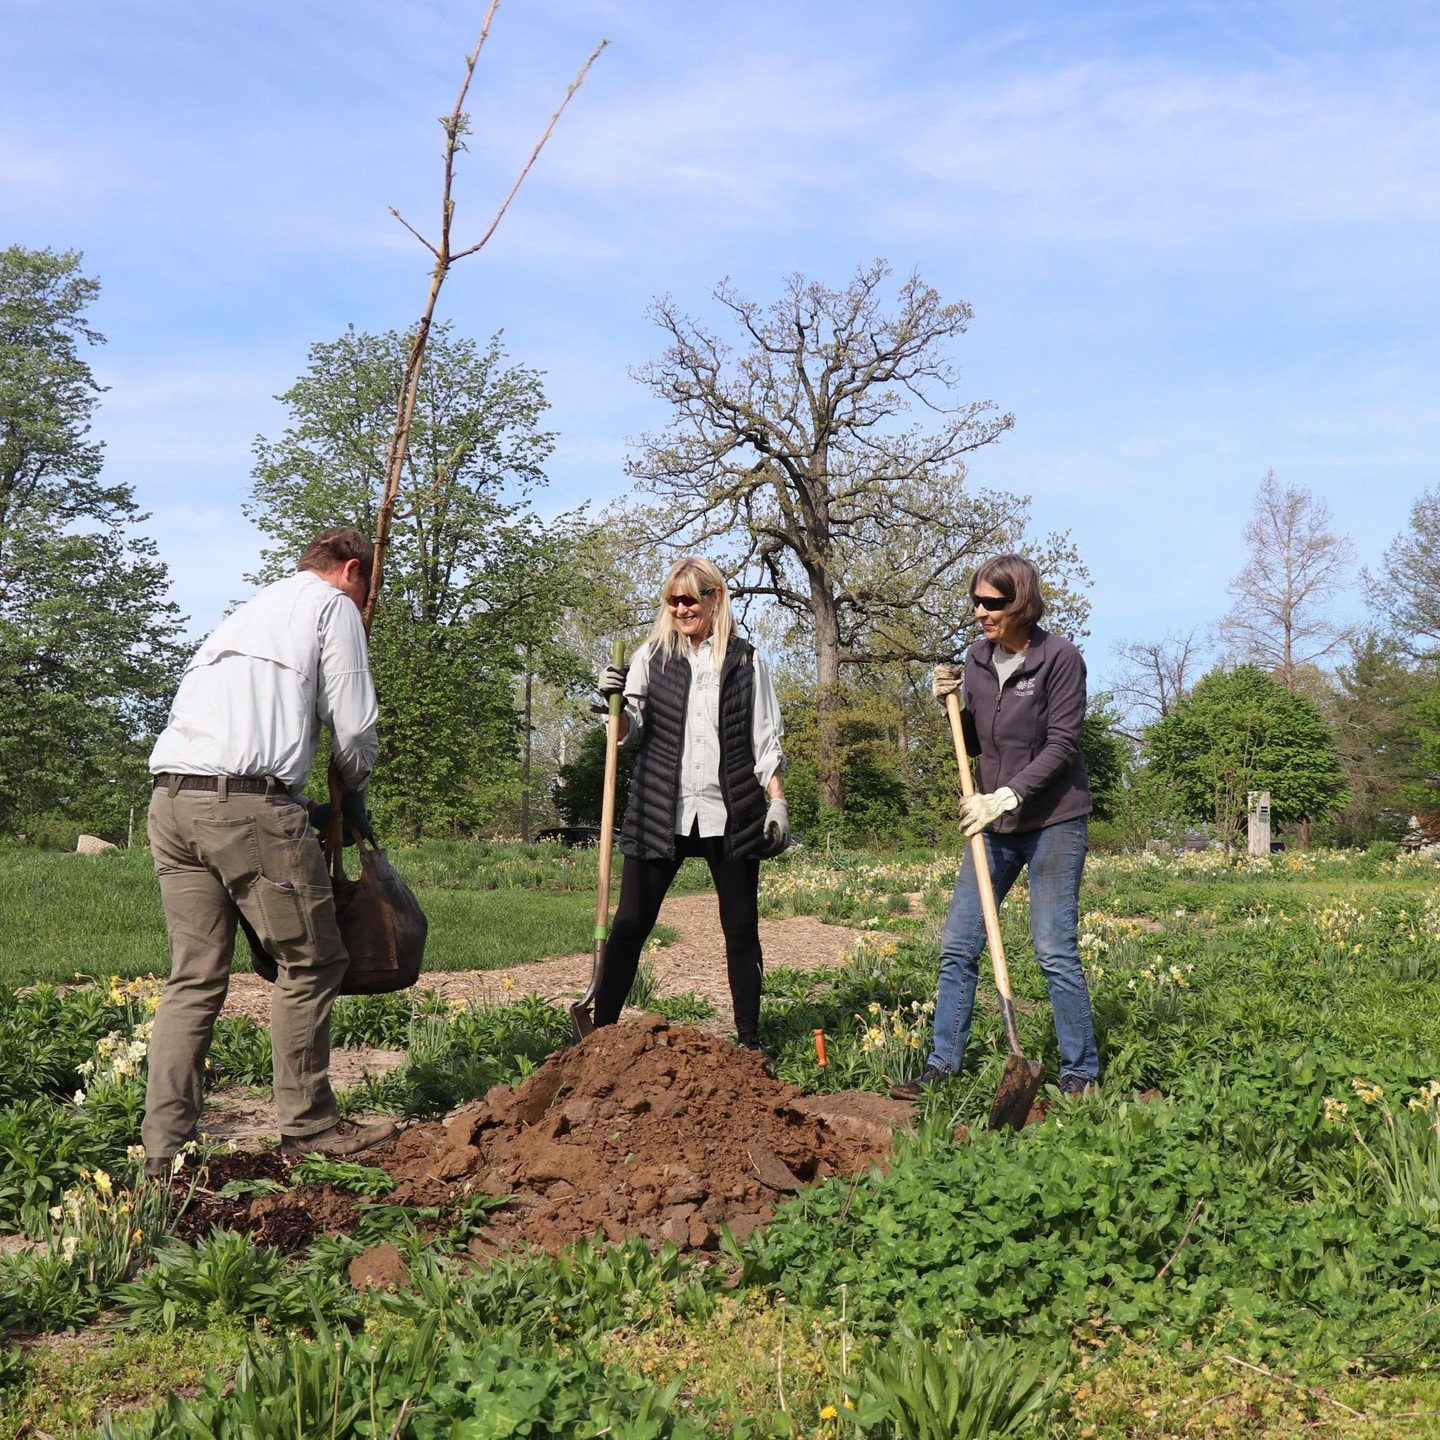 Our conservancy chairs valuable expertise and our teams spend countless hours...
🌳 planting 348 trees &gt;&gt; 
🌱 stewarding 194 acres of Nature Reserve &gt;&gt;
🌻 maintaining 995,000 square feet of landscape beds &gt;&gt;
🌷 planting 100,050 flow